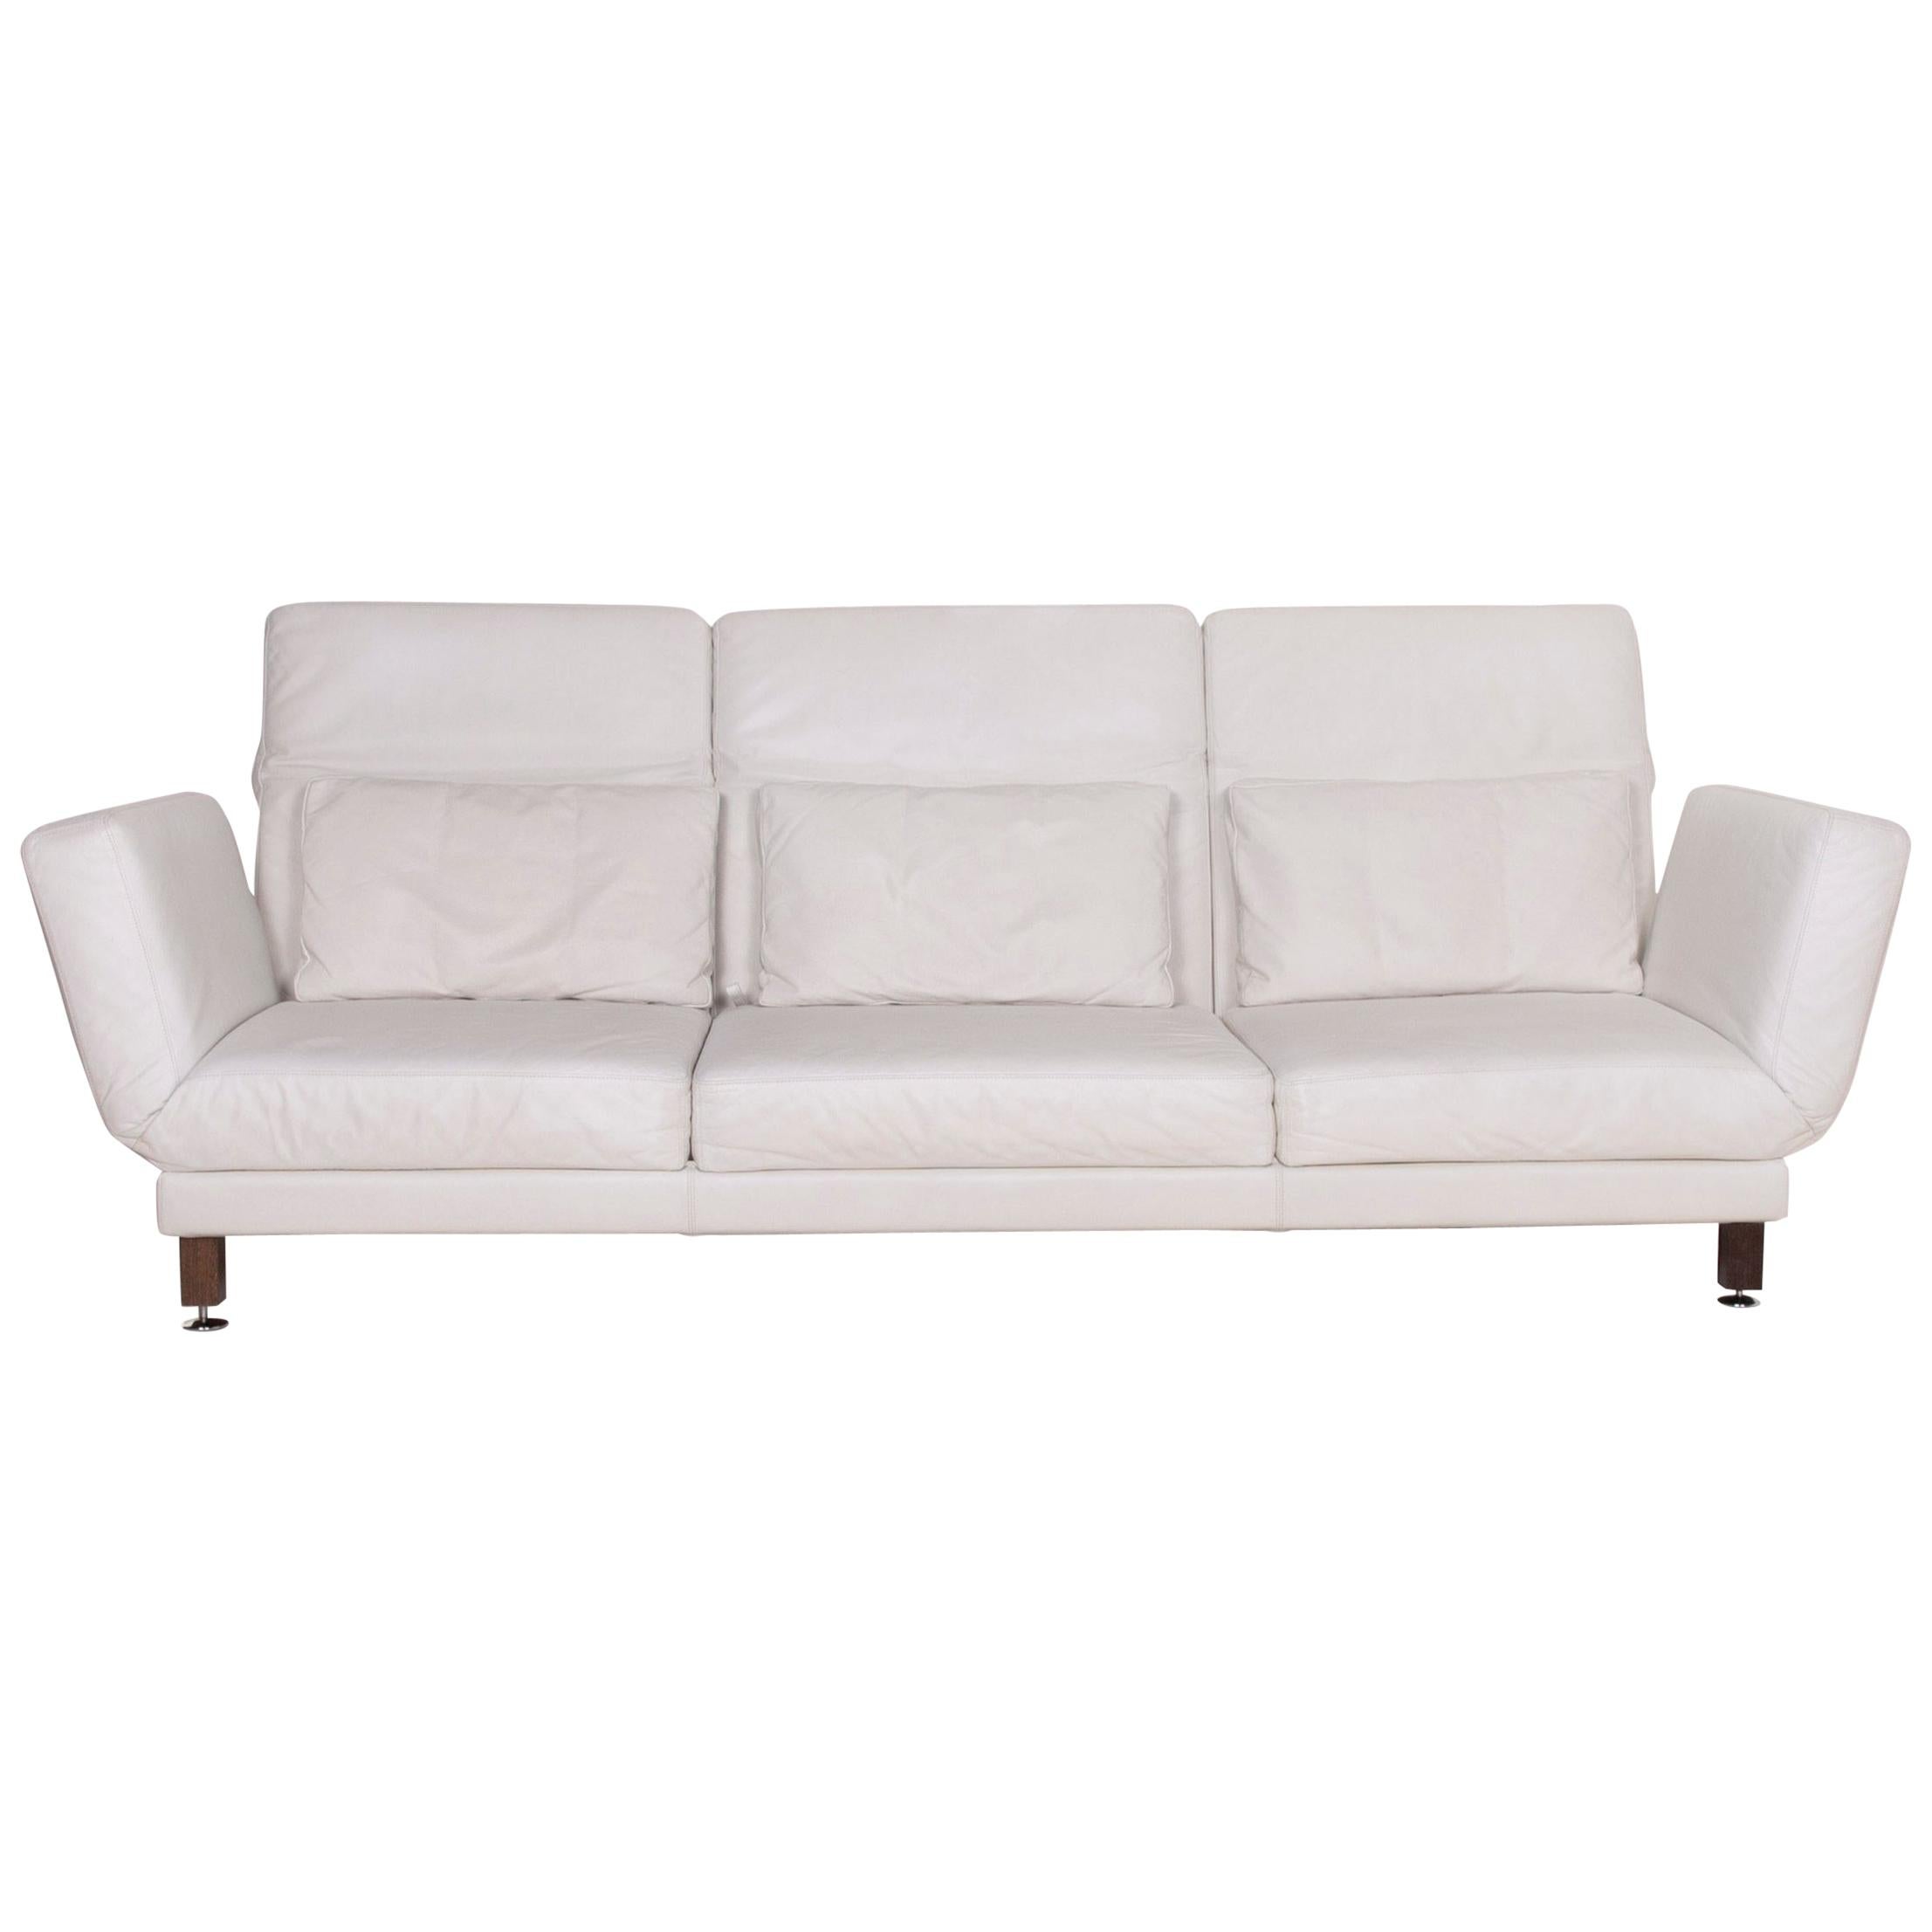 Brühl & Sippold Moule Leather Sofa White Three-Seat Relaxation Function For Sale